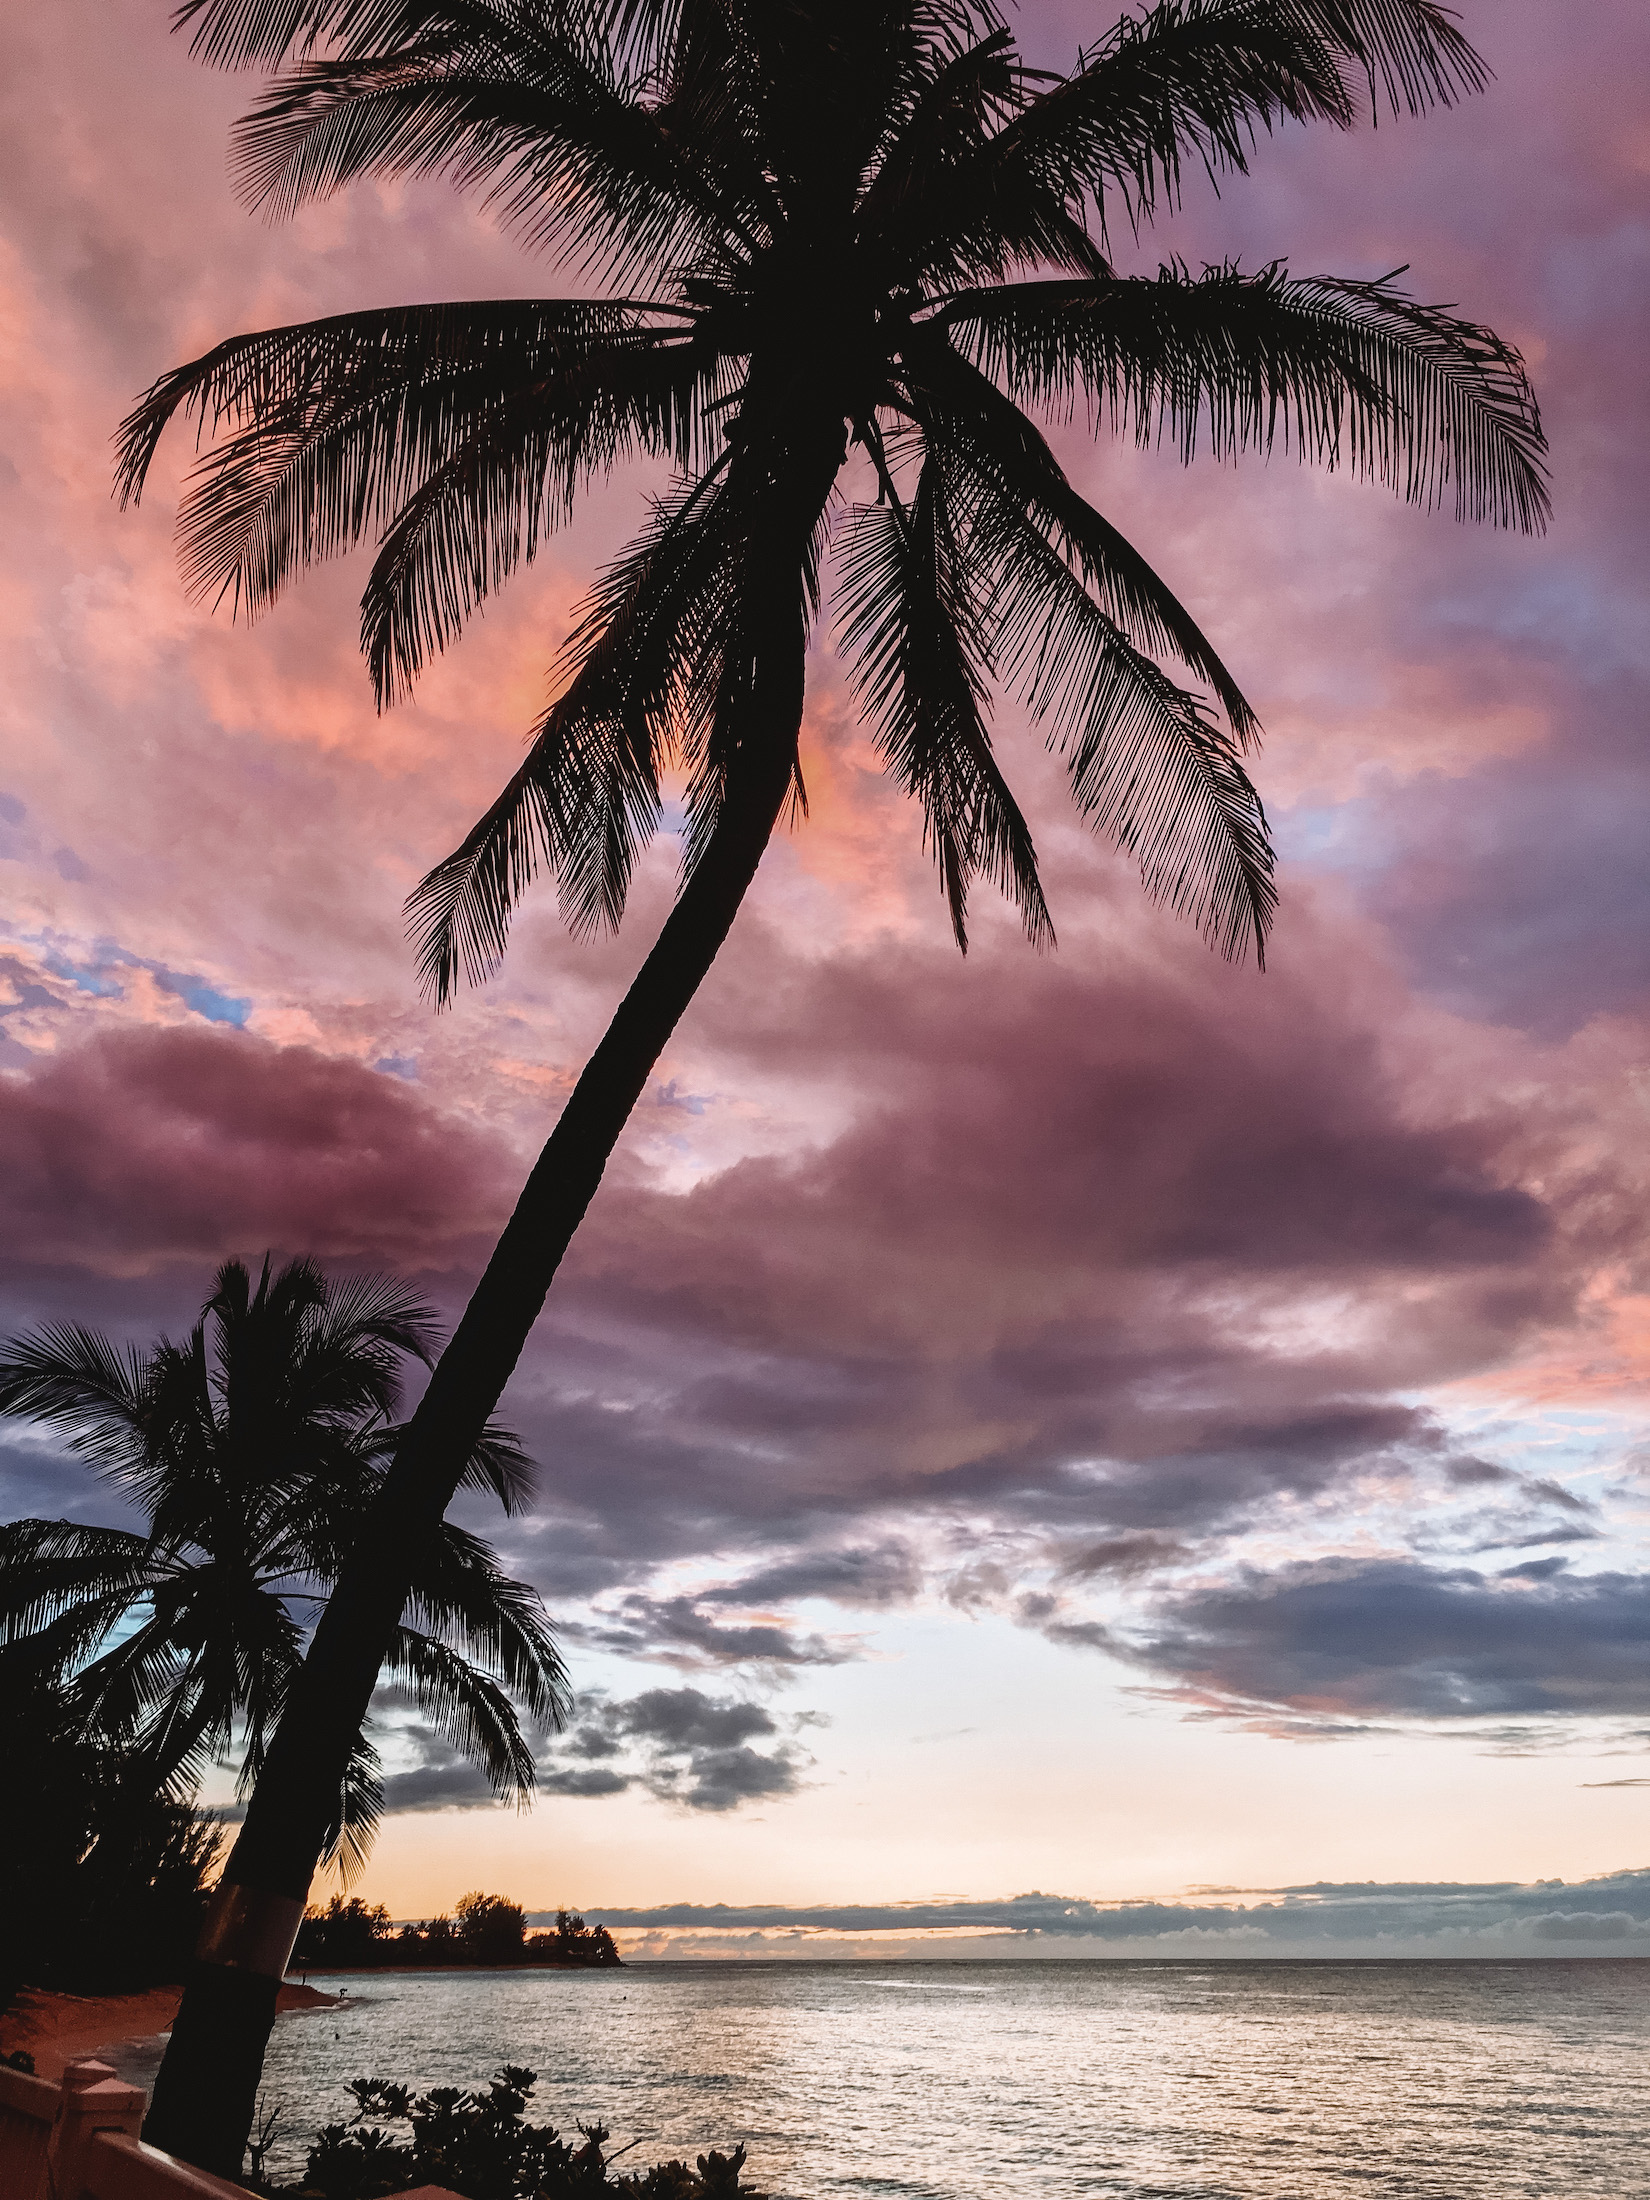 Pink and purple sunset with palm trees and ocean in Maui, Hawaii, USA